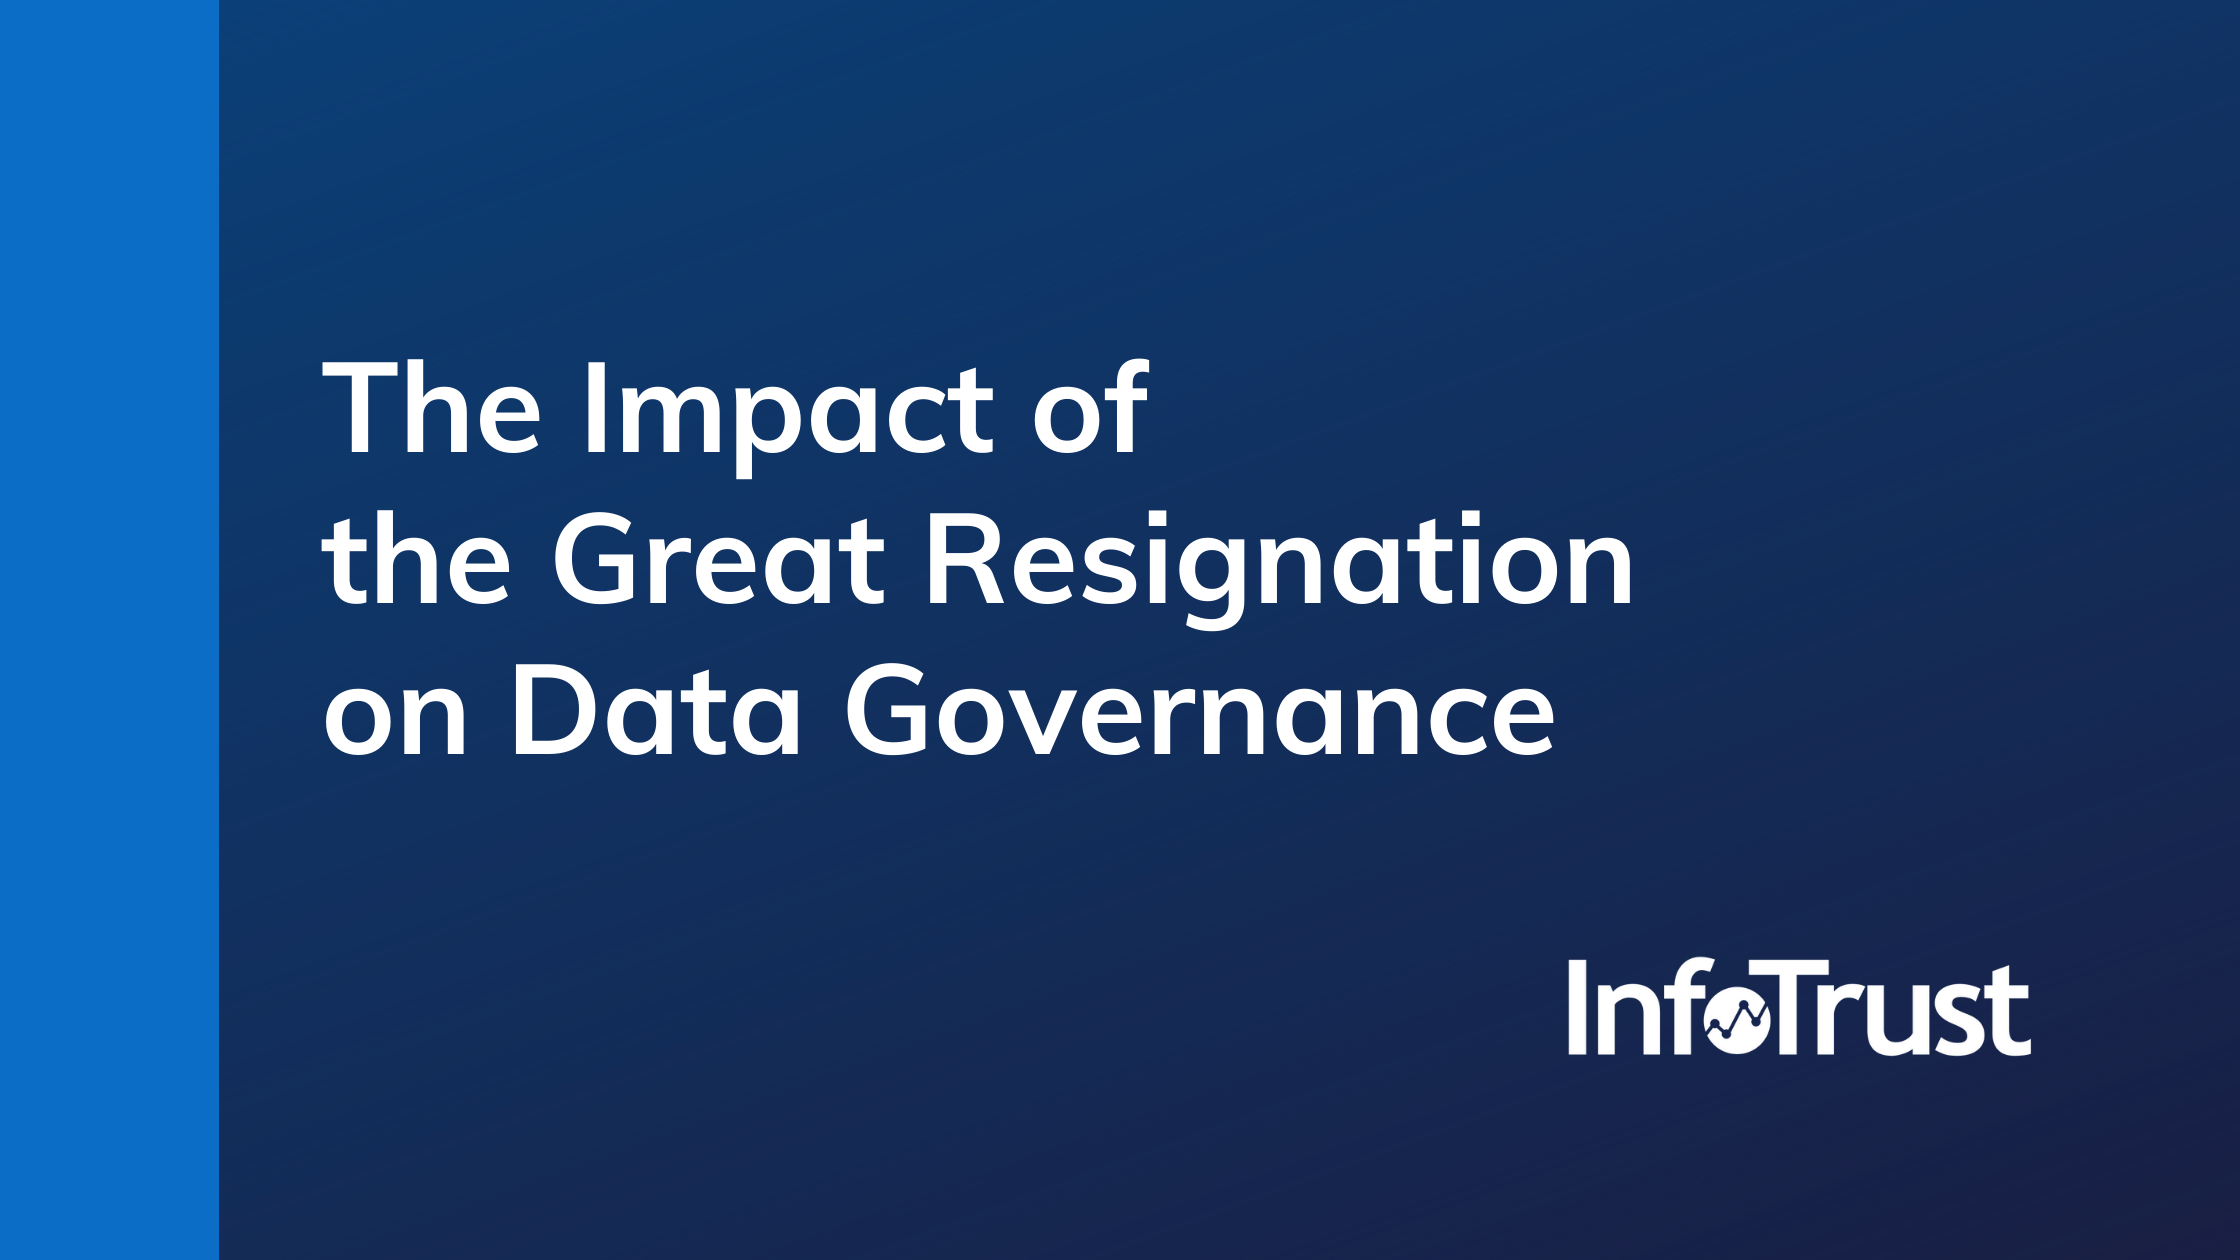 The Impact of the Great Resignation on Data Governance